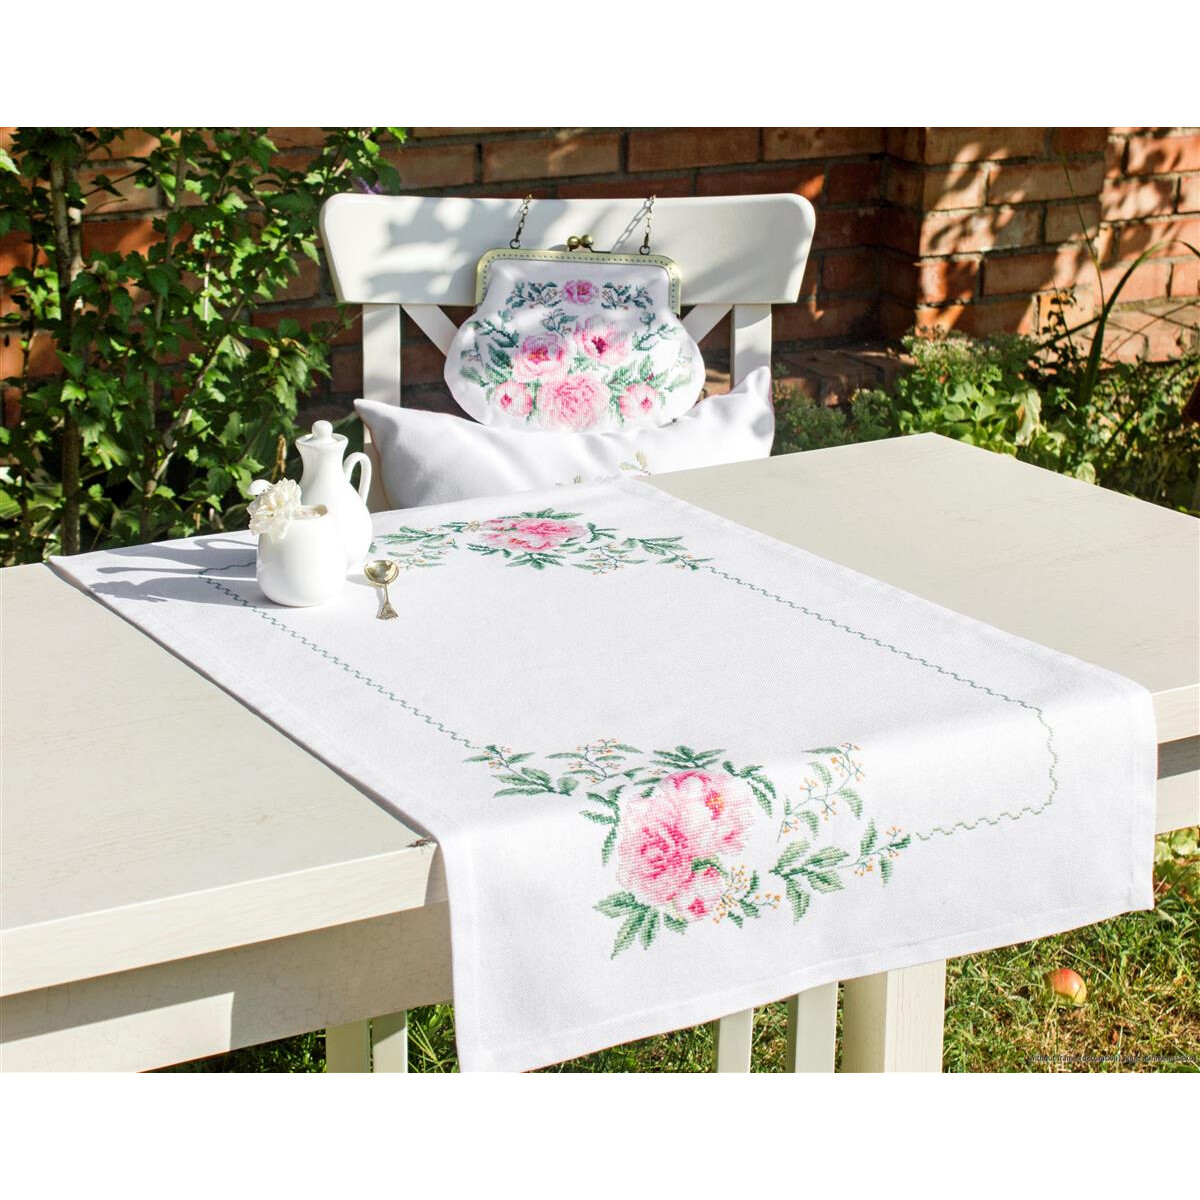 A white table with a table runner embroidered with...